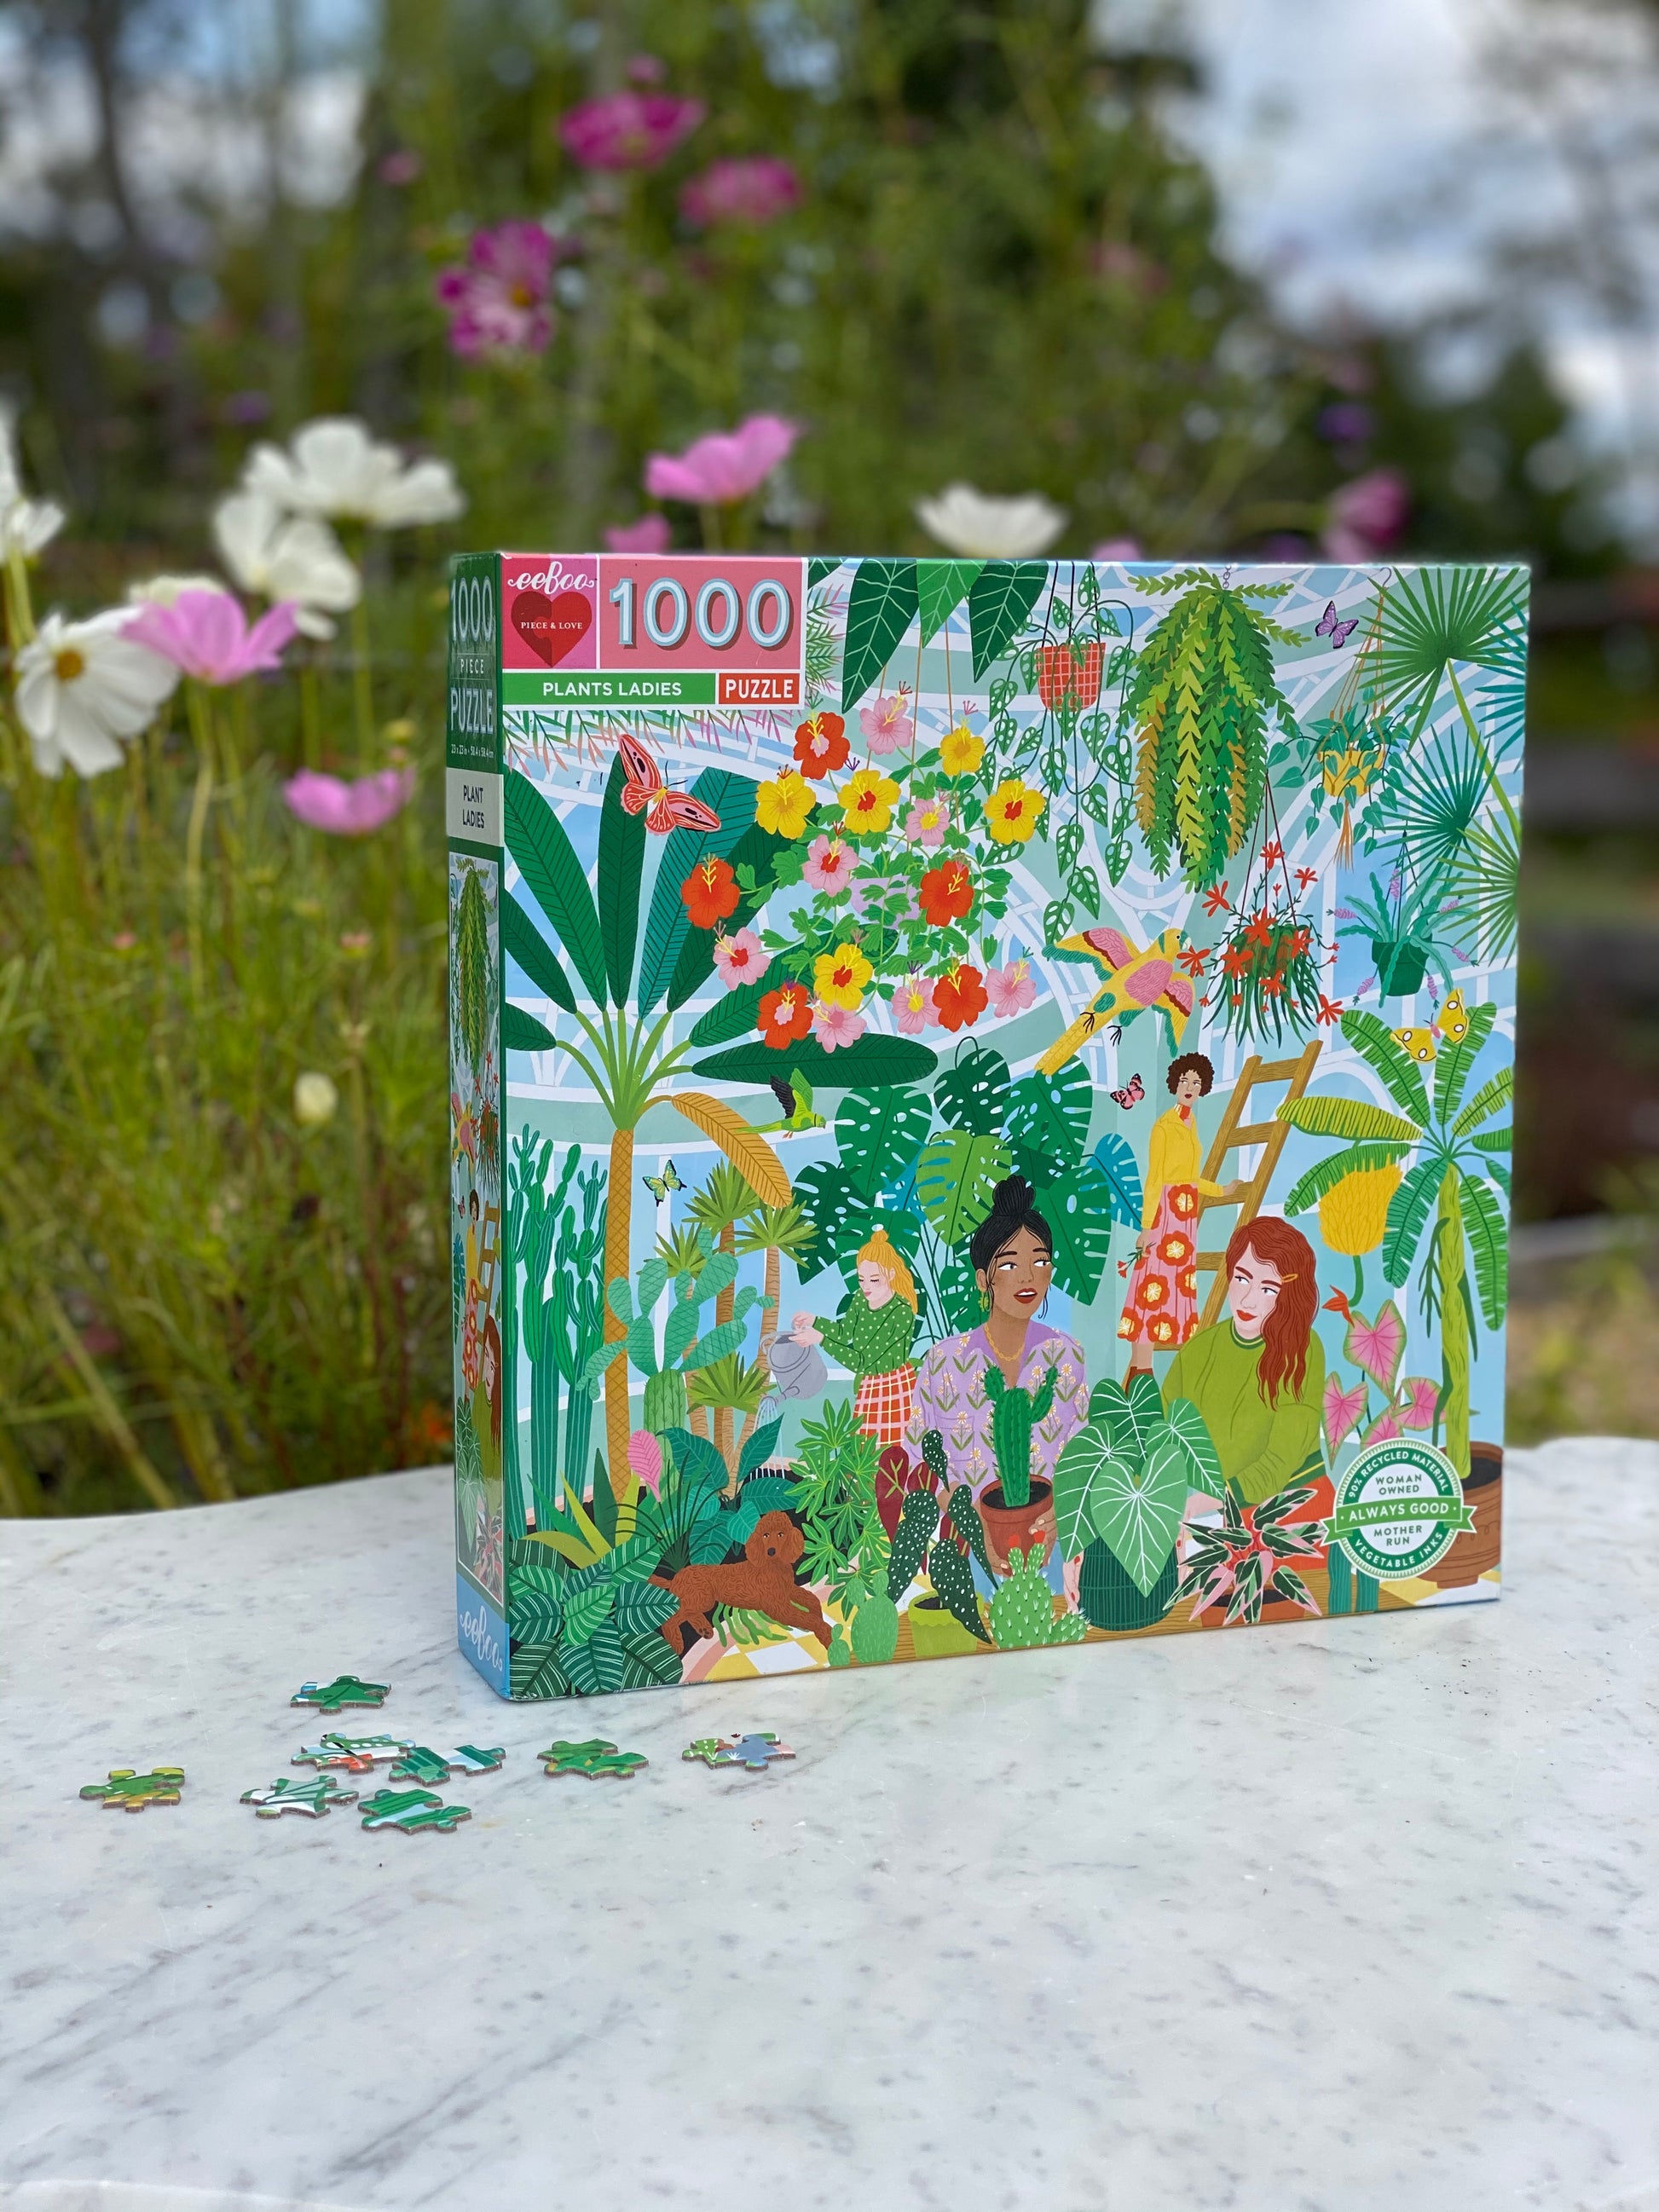 Plant Ladies Garden 1000 Piece Jigsaw Puzzle | eeBoo Piece & Love | Amazing Gifts for Plant Lovers